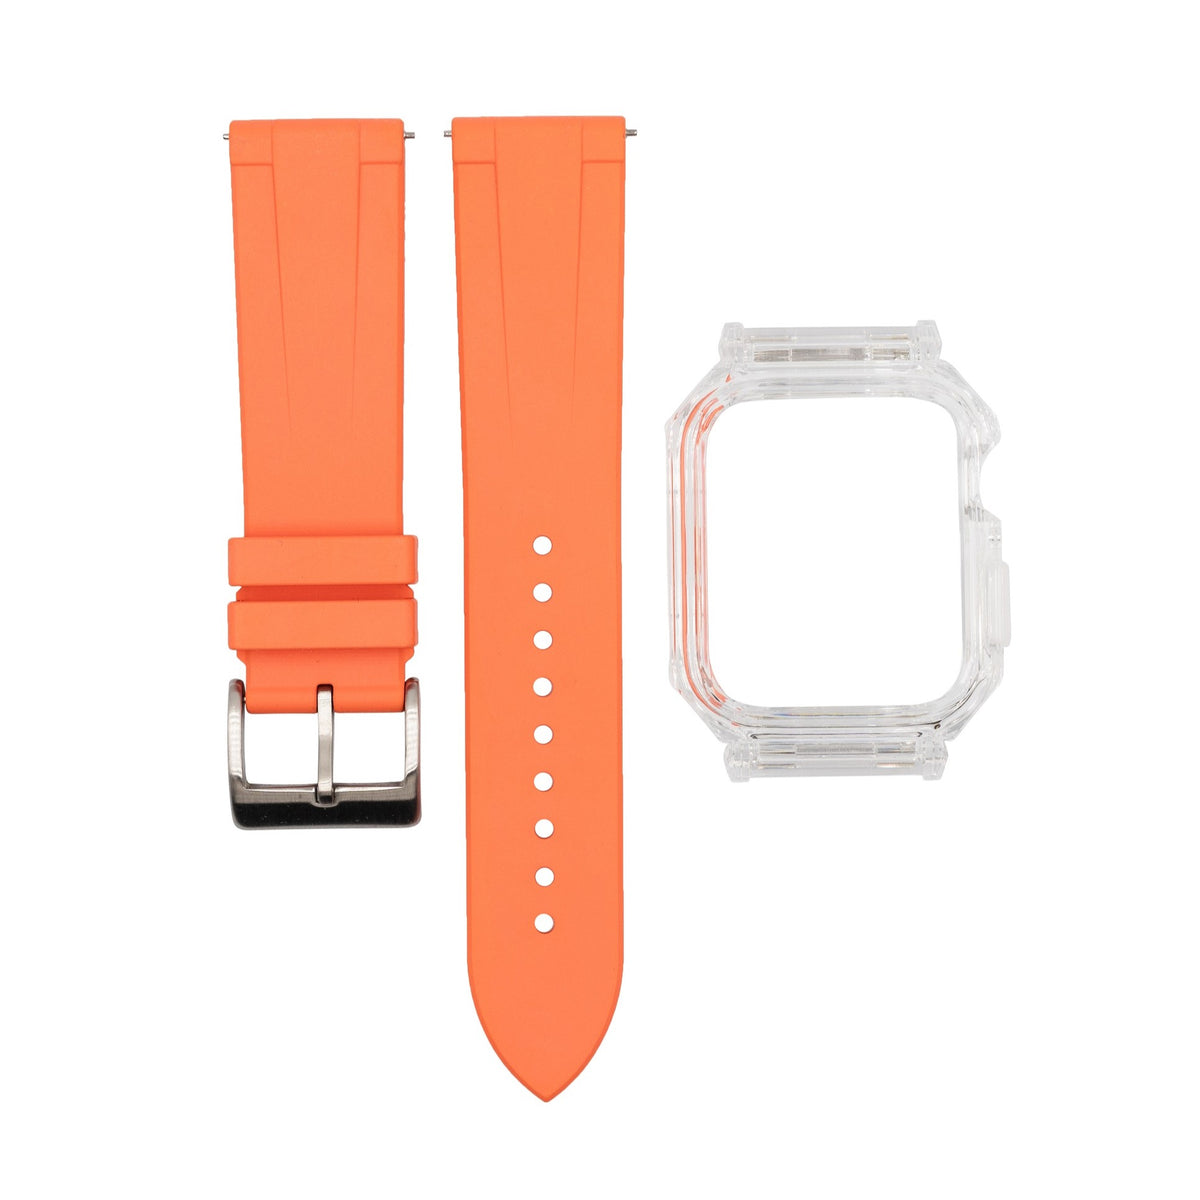 10 places to get Watch Straps in Singapore - Wah So Shiok